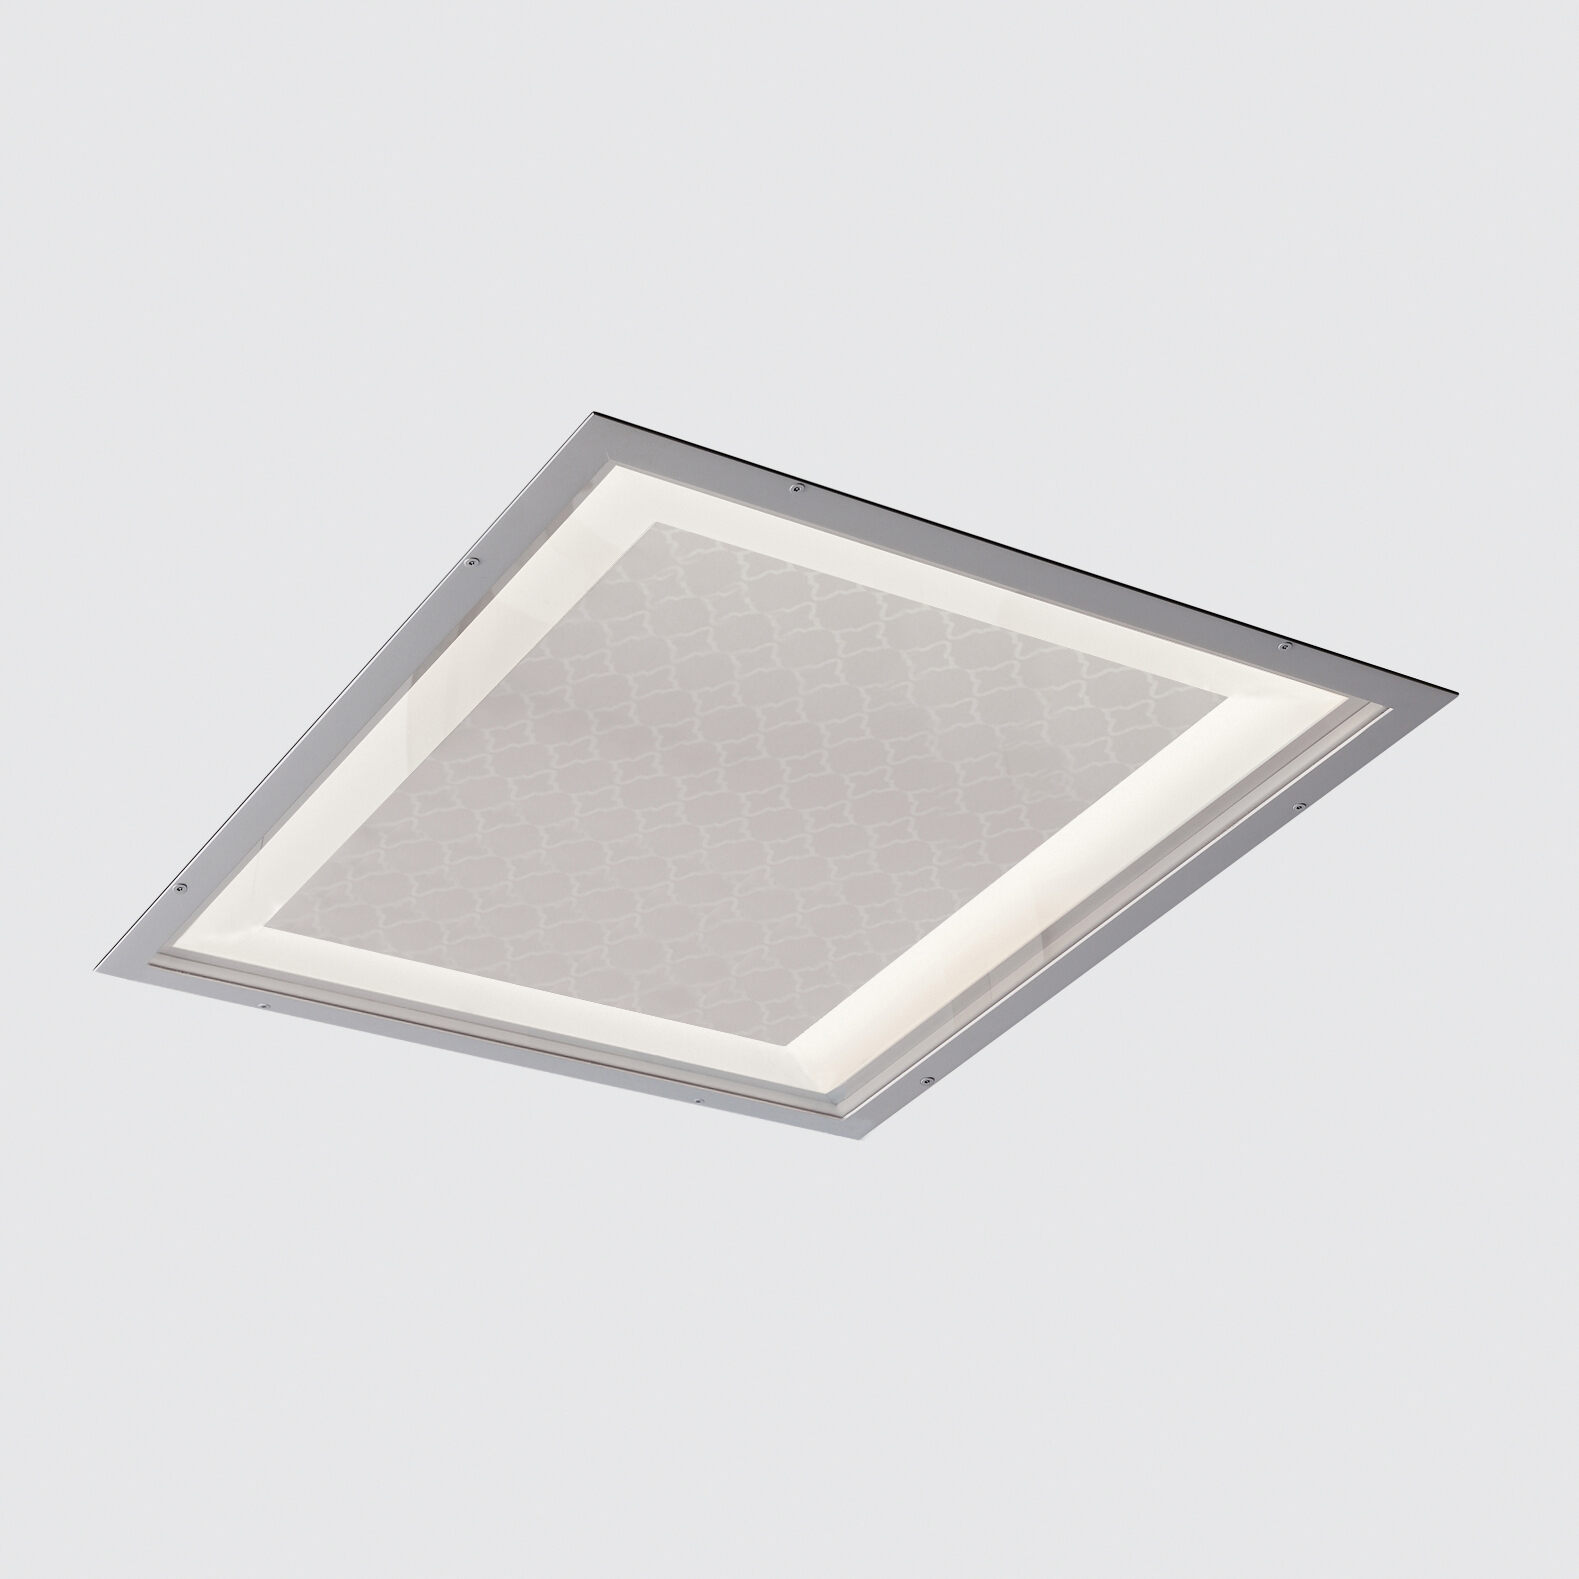 A 2x2 recessed ceiling luminaire with a center pattern for behavioral health patient rooms